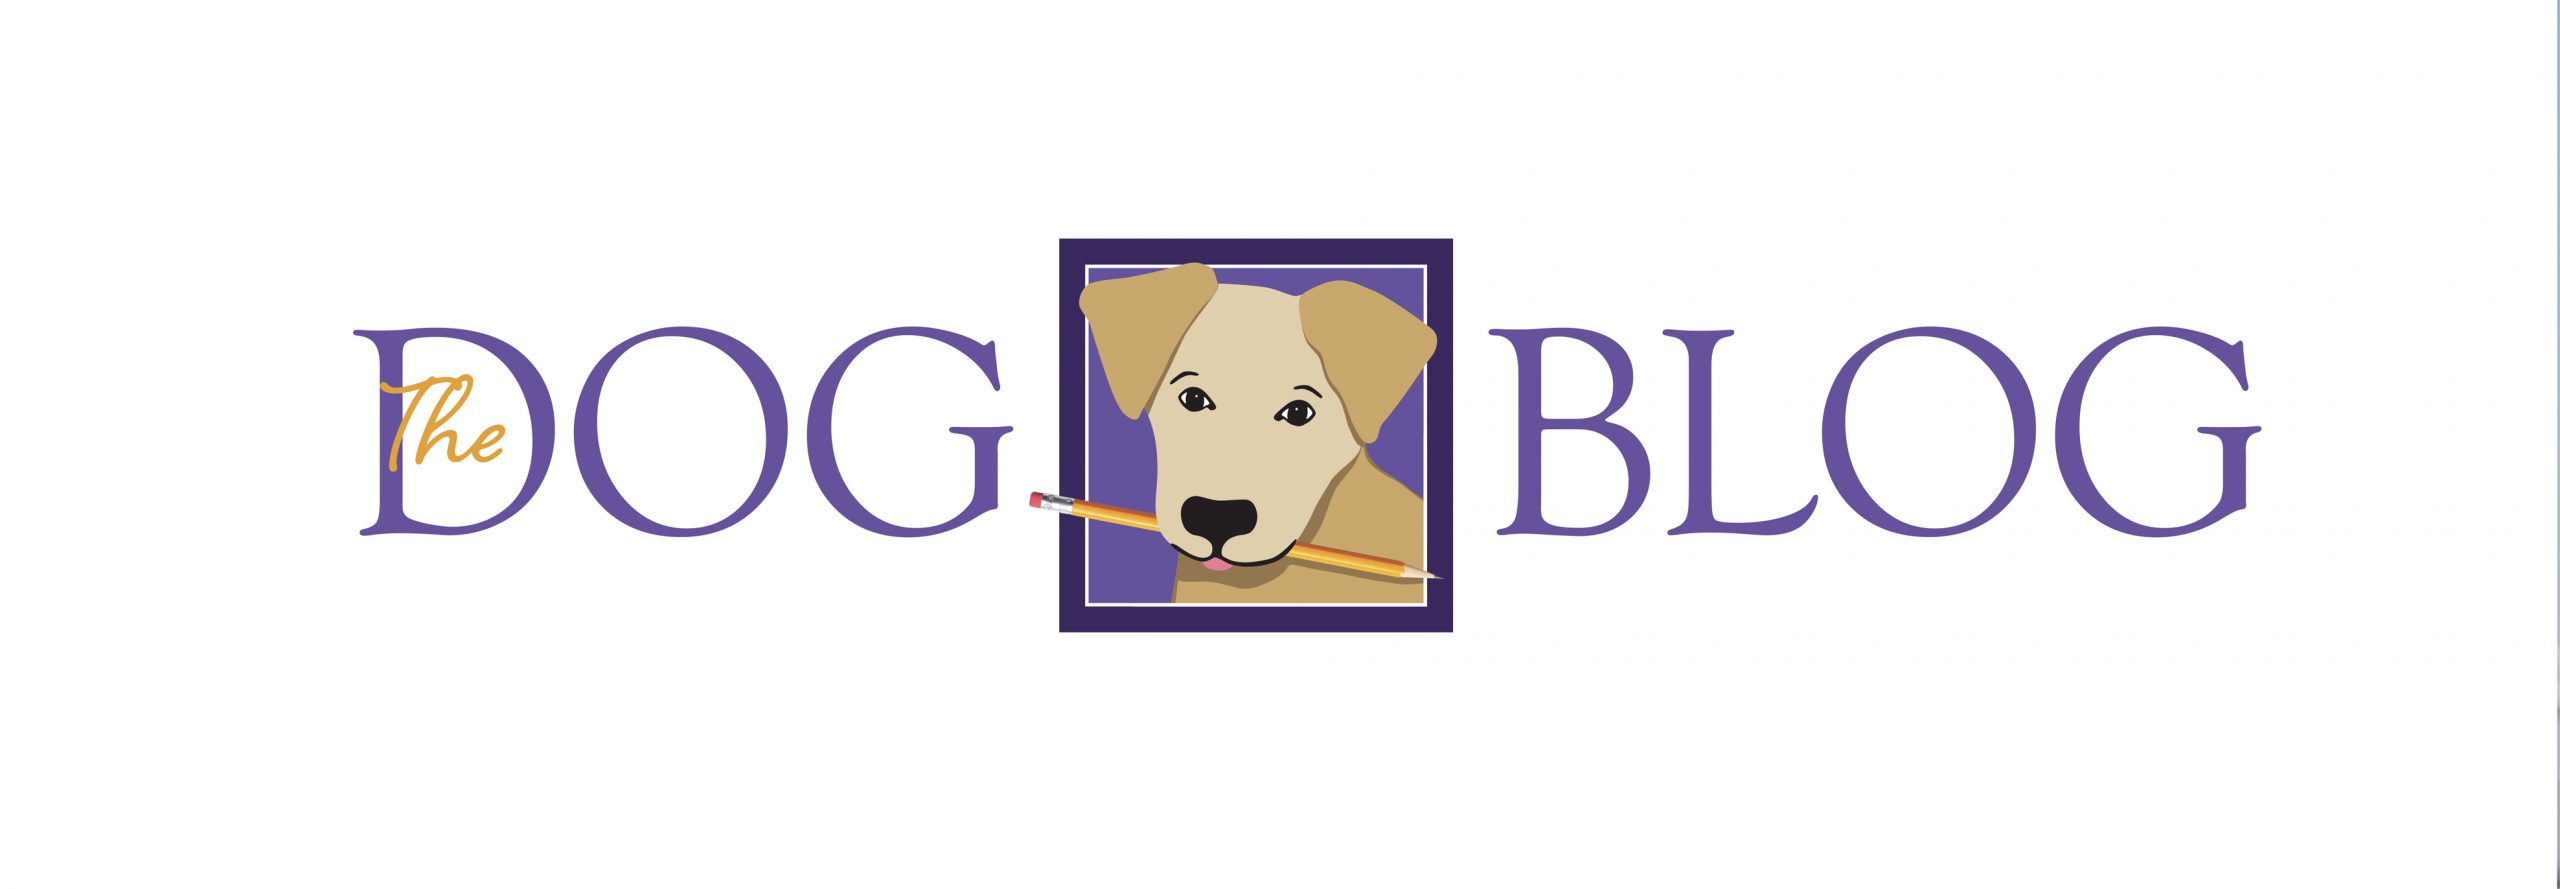 The Dog Blog header in purple text